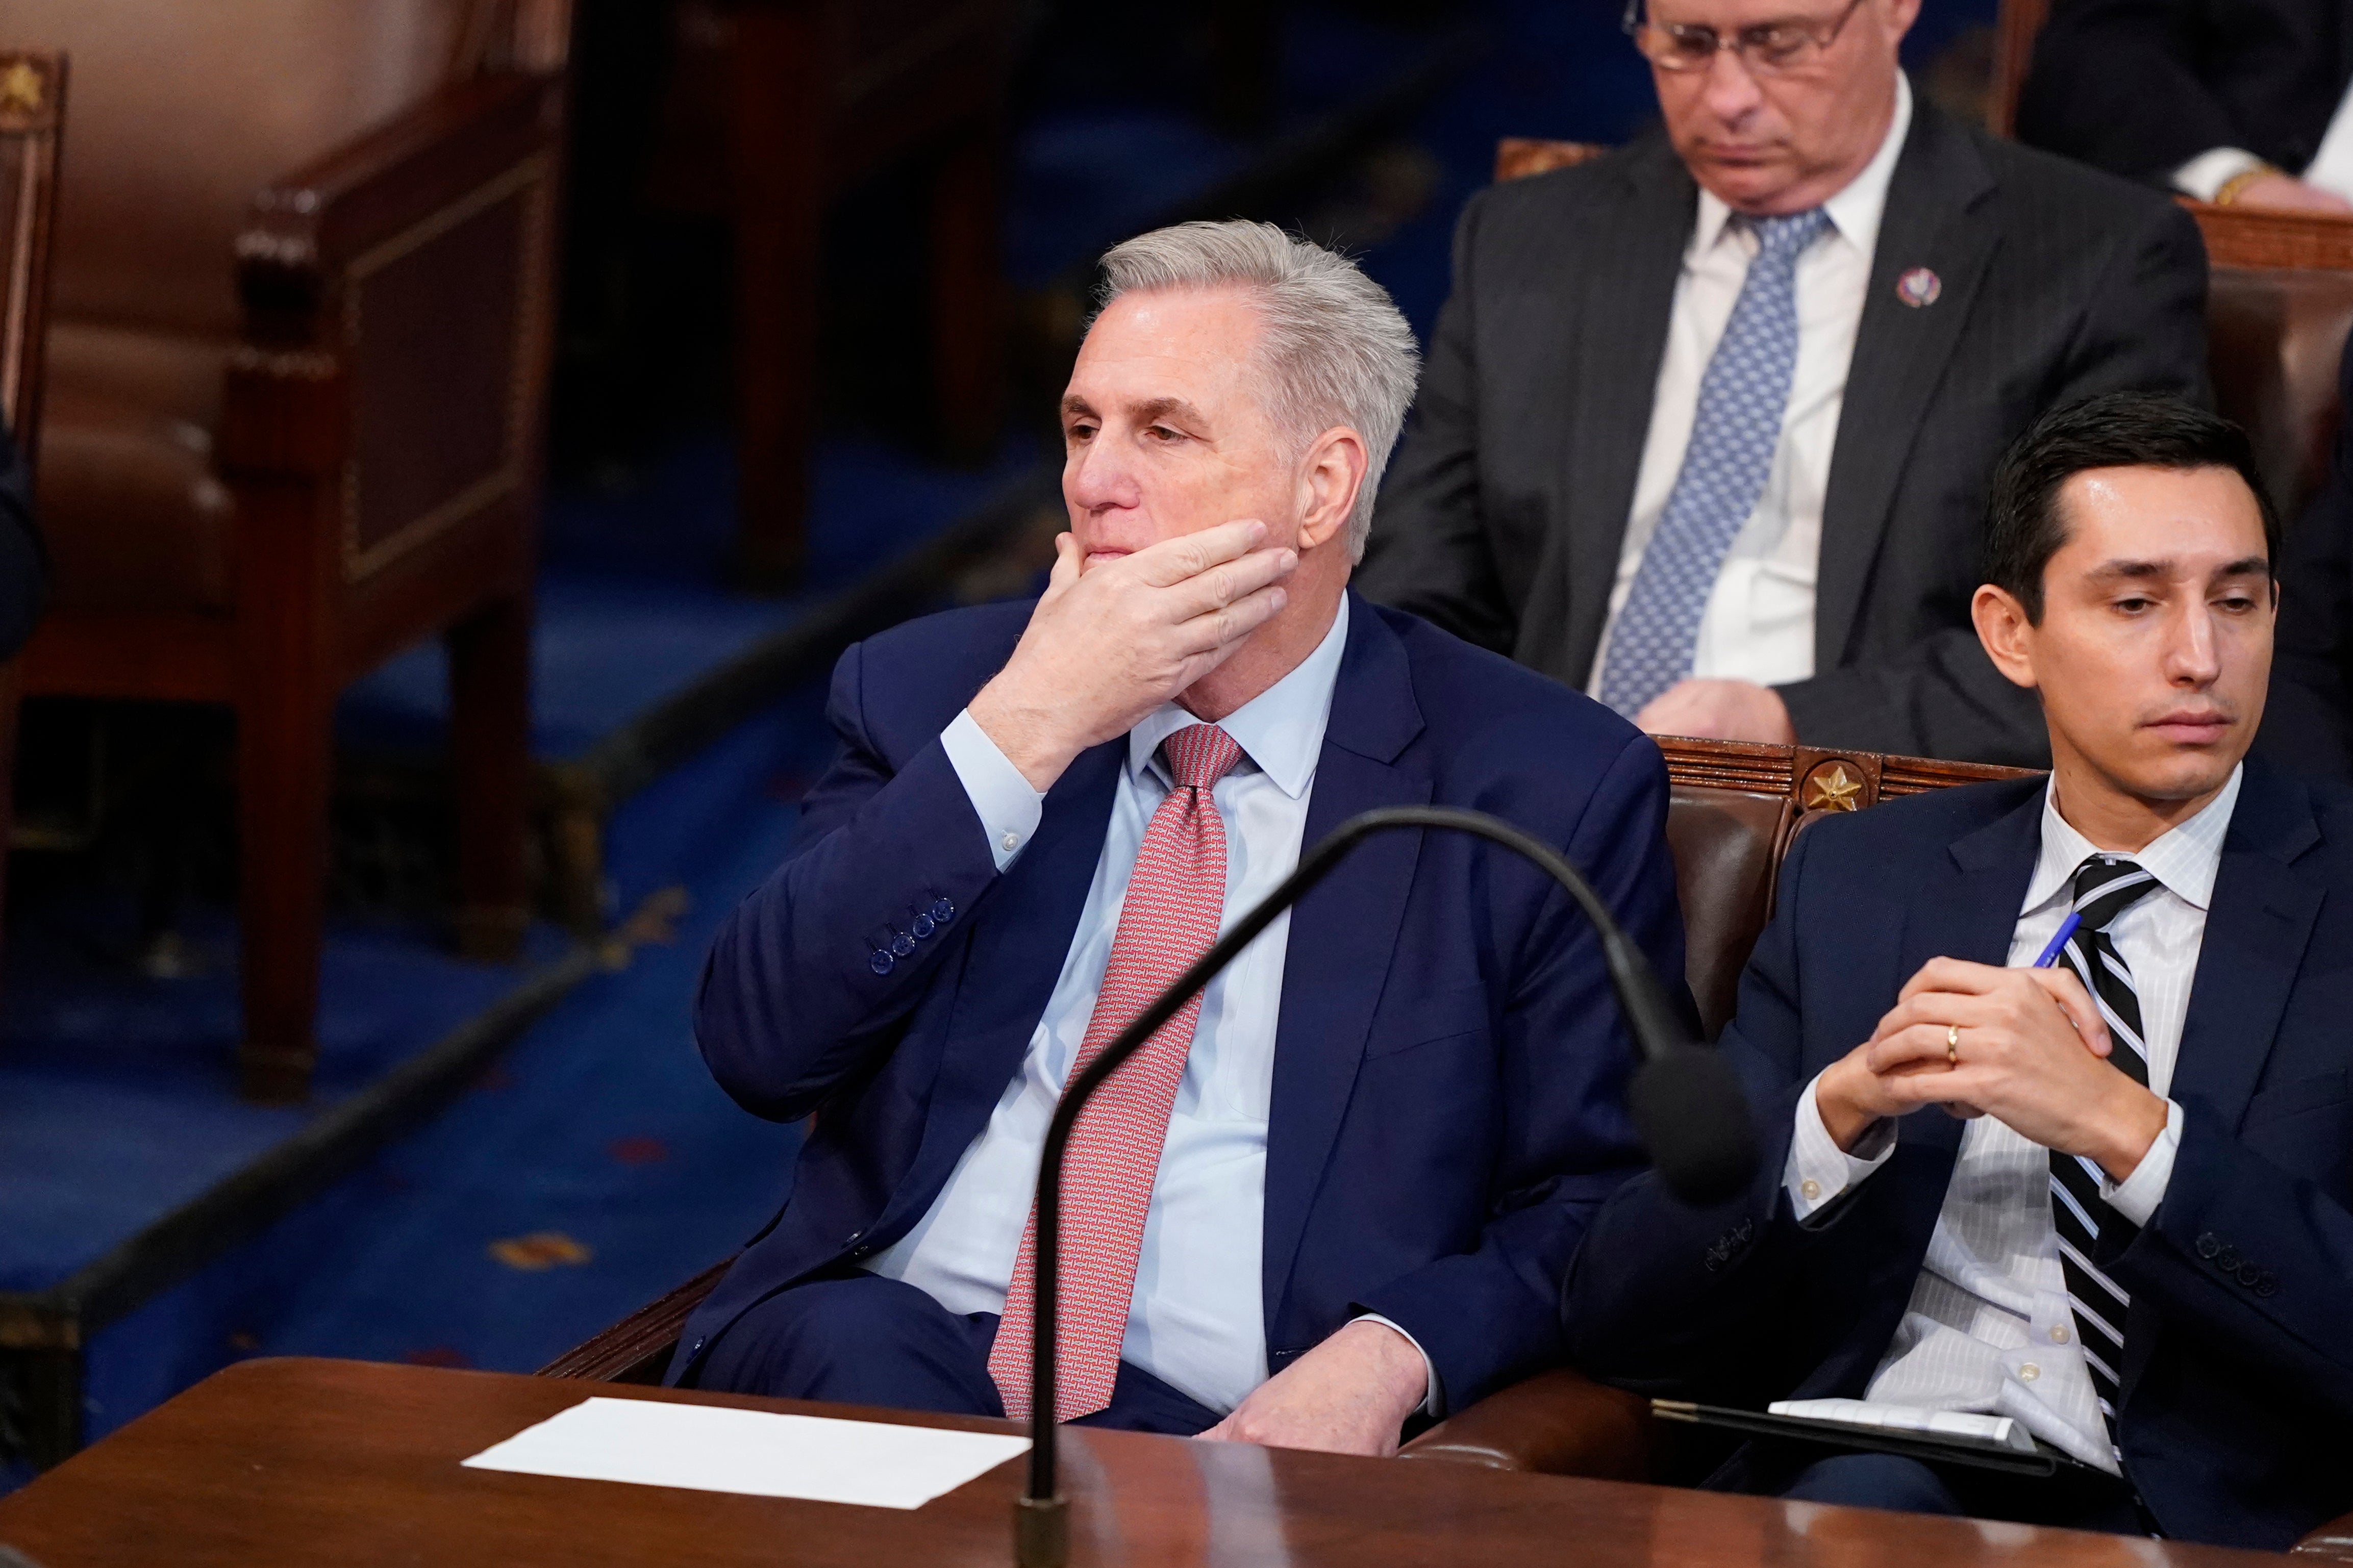 Kevin McCarthy failed to muster up enough votes from his own caucus to lead the chamber